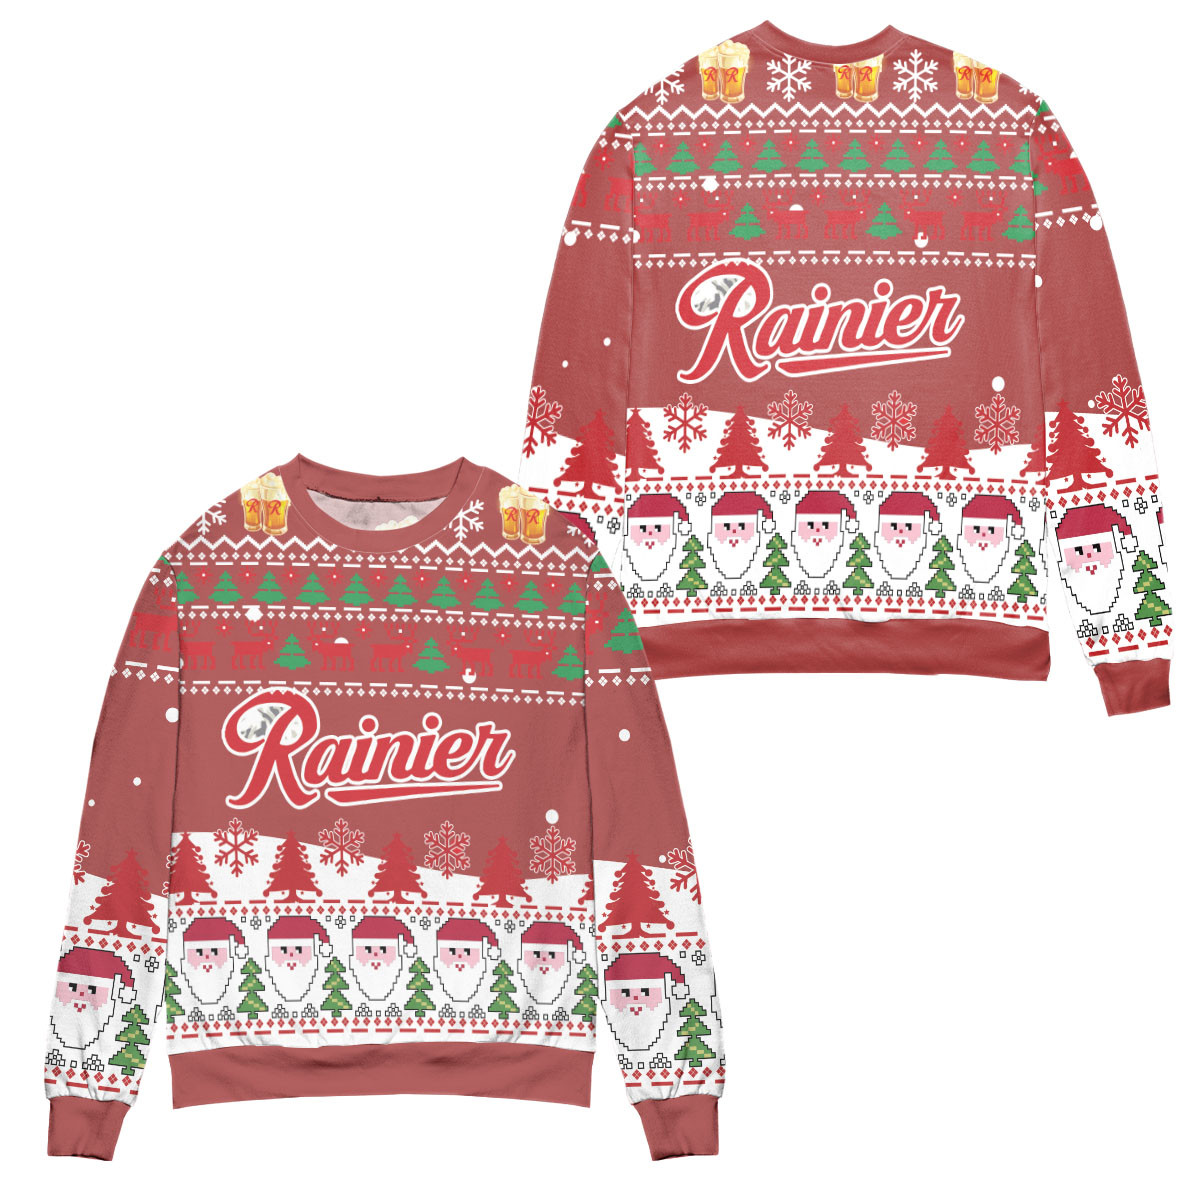 Rainier Beer Logo Santa Claus Pattern Ugly Christmas Sweater – All Over Print 3D Sweater